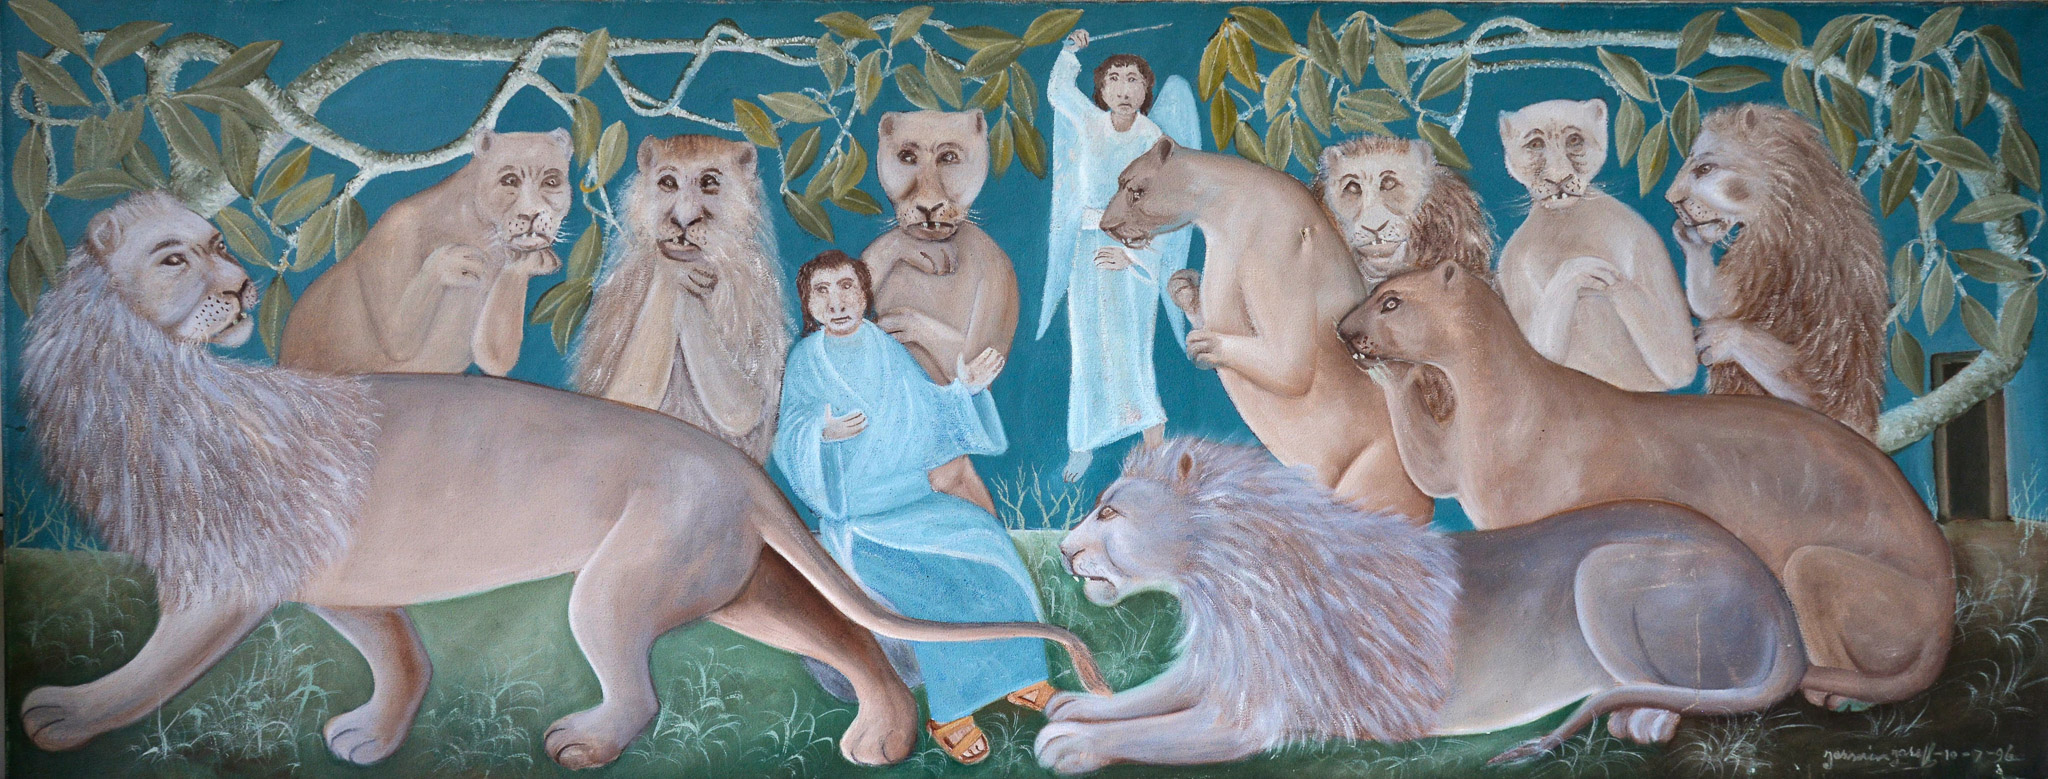 Angels and Lions, 1996